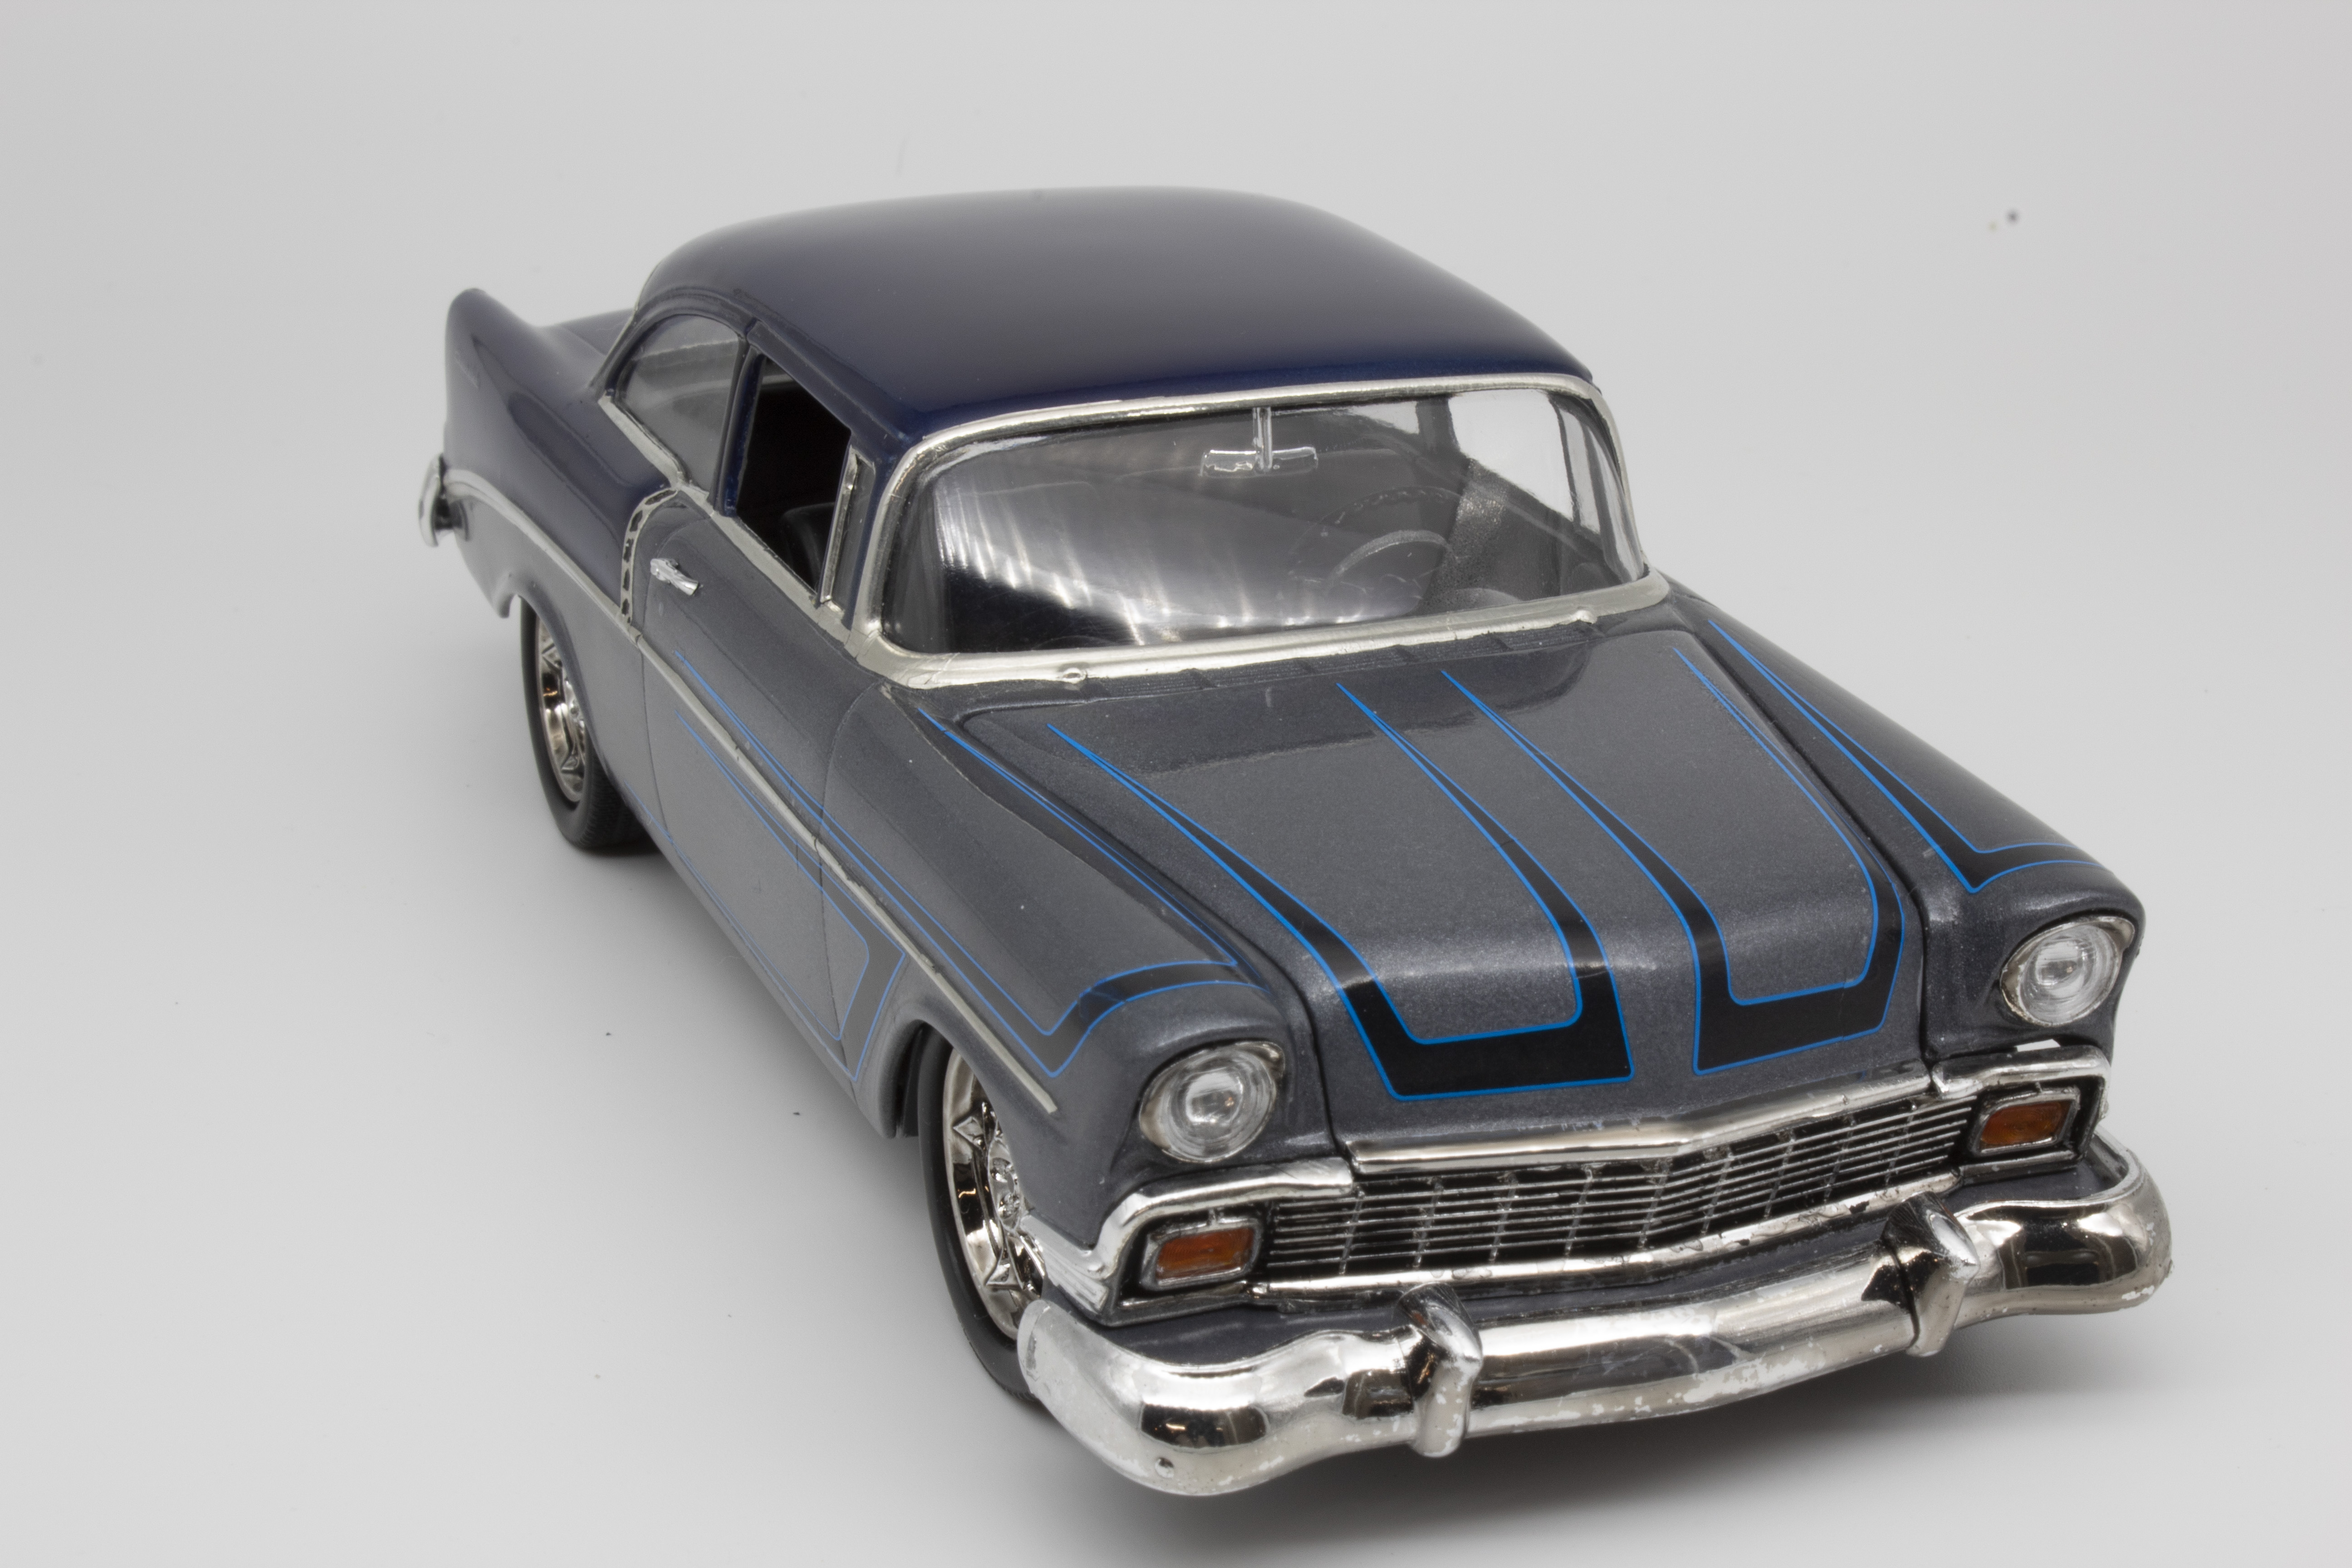 Build review of the Revell 1956 Chevy Delray 2 'n 1 scale model